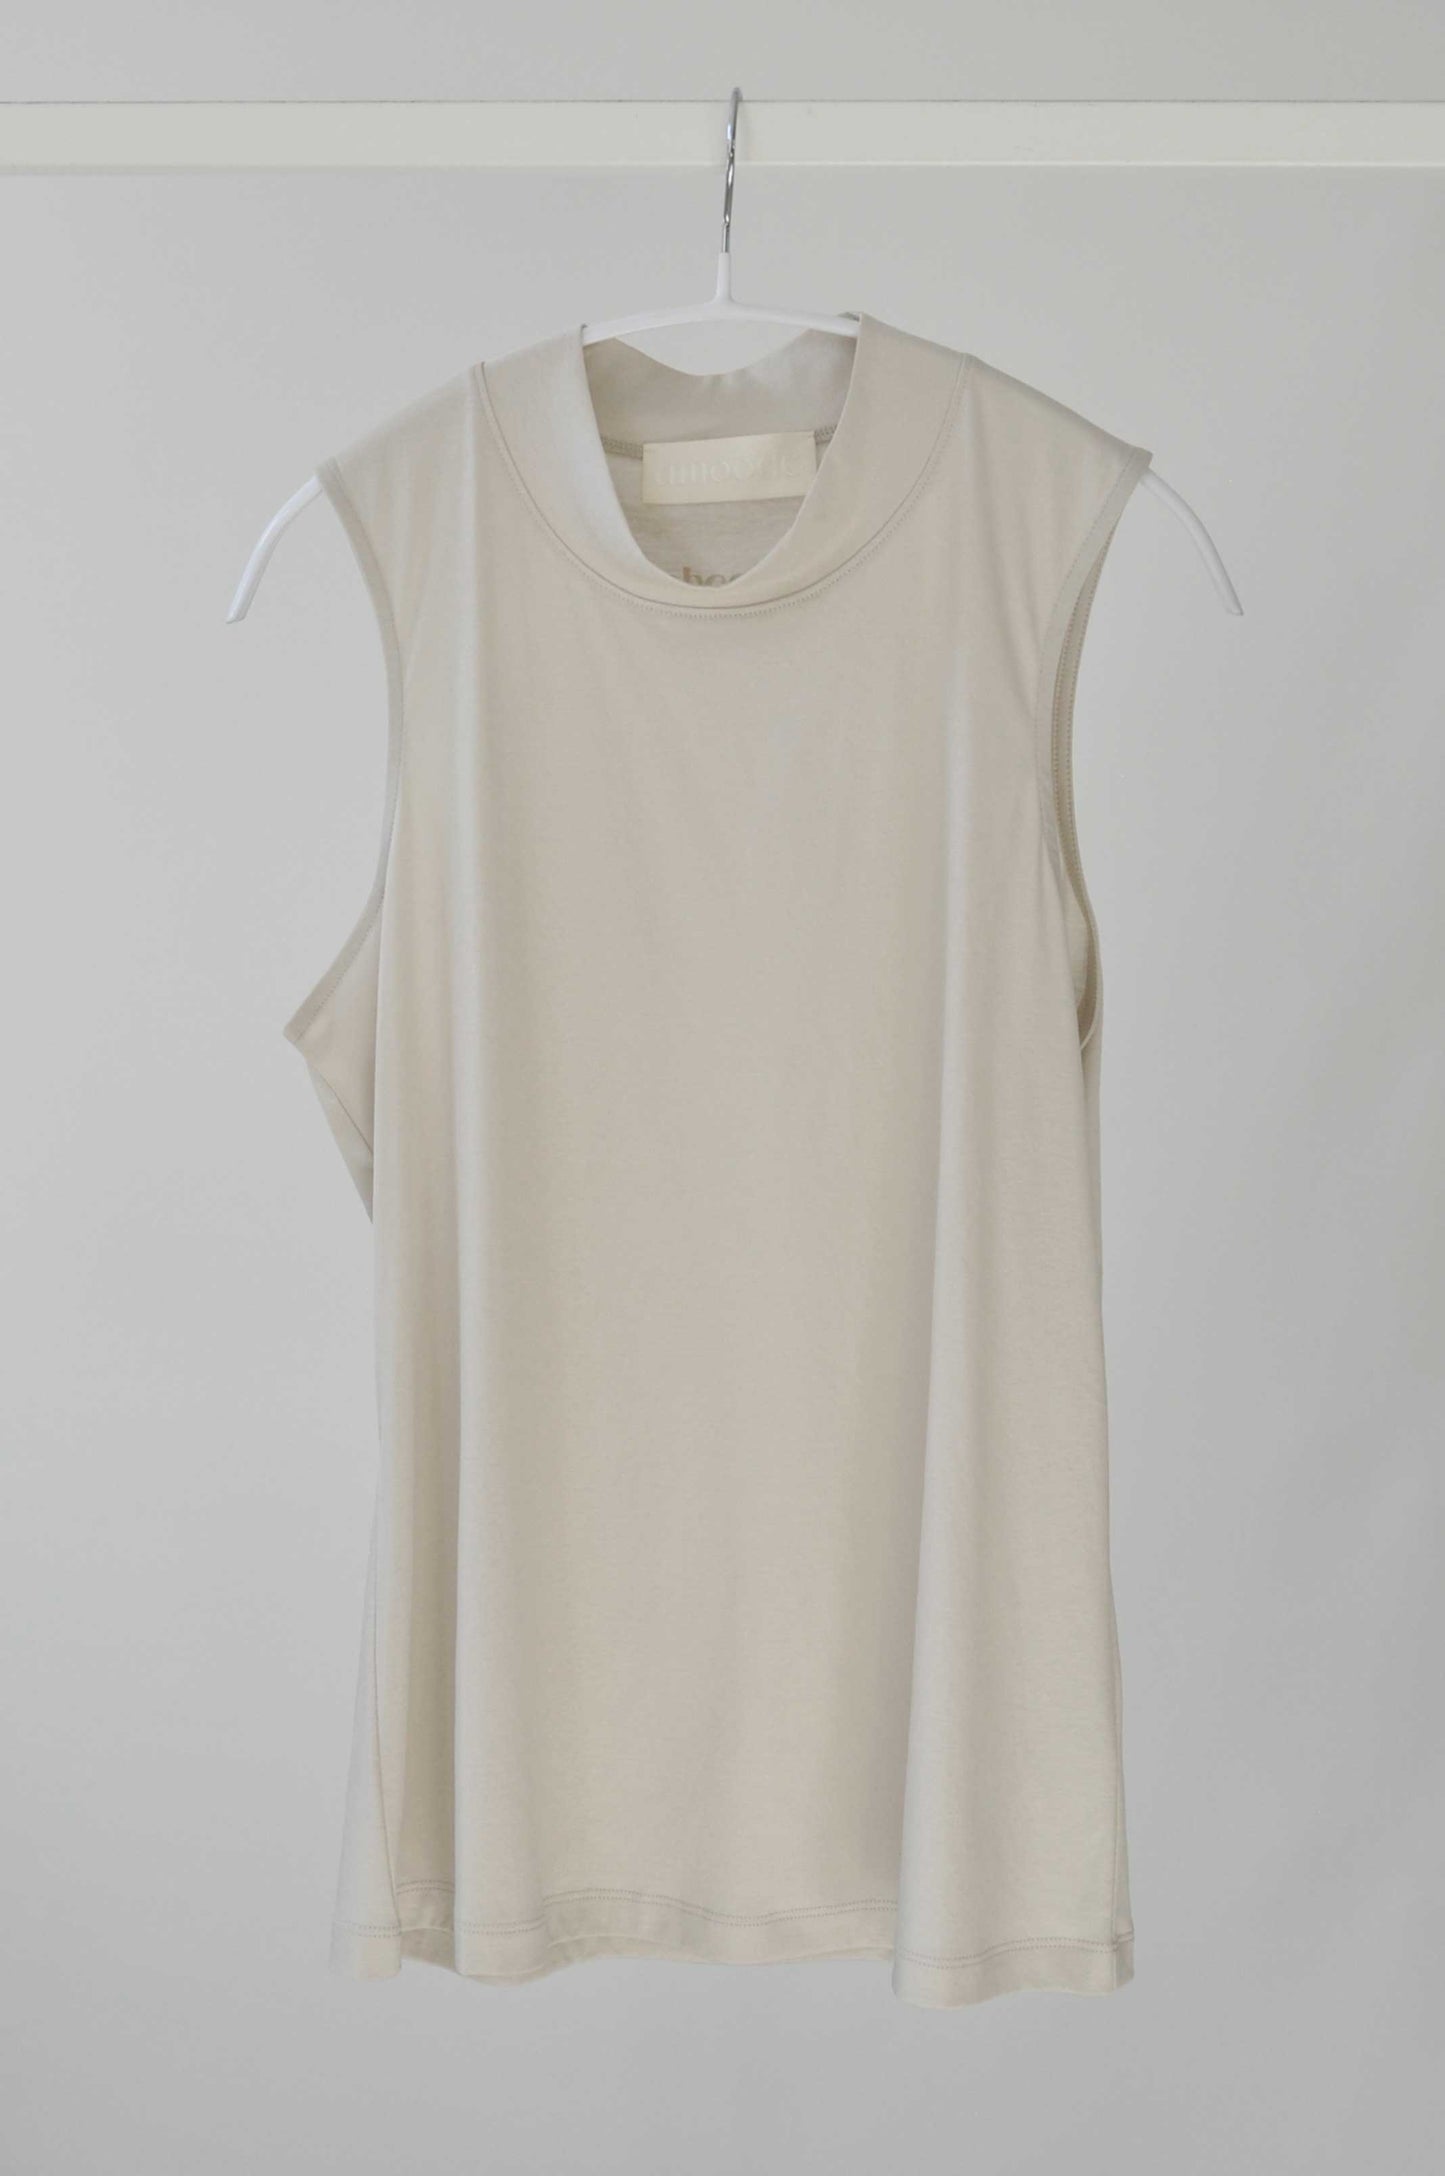 Front of Alanis Top in Soft Beige on a hanger